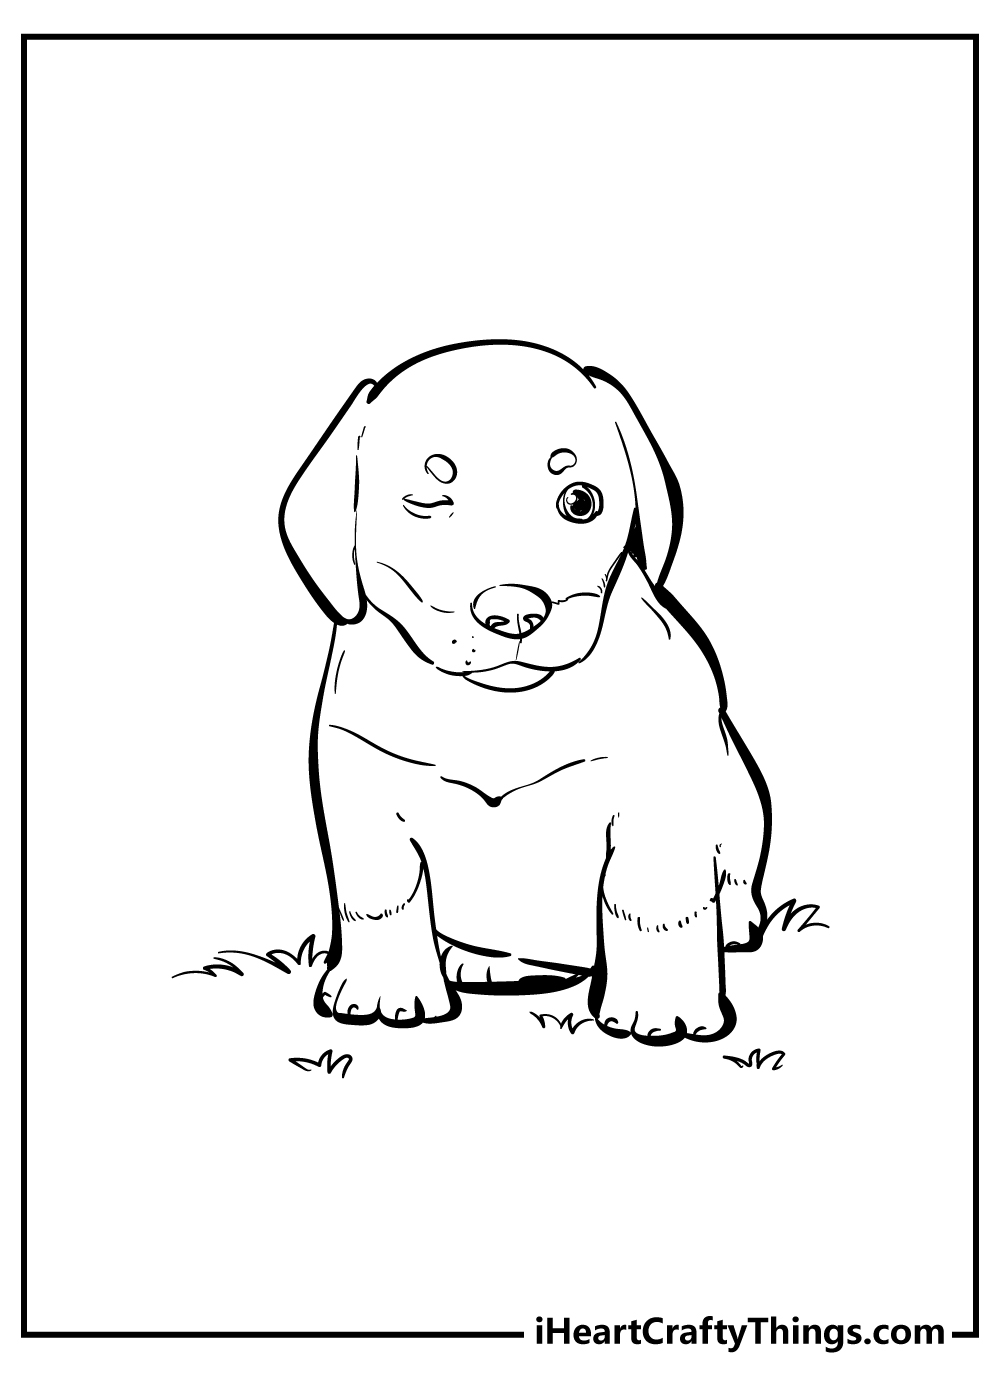 Dog Coloring Pages - Super Adorable And 100% Free (2022)